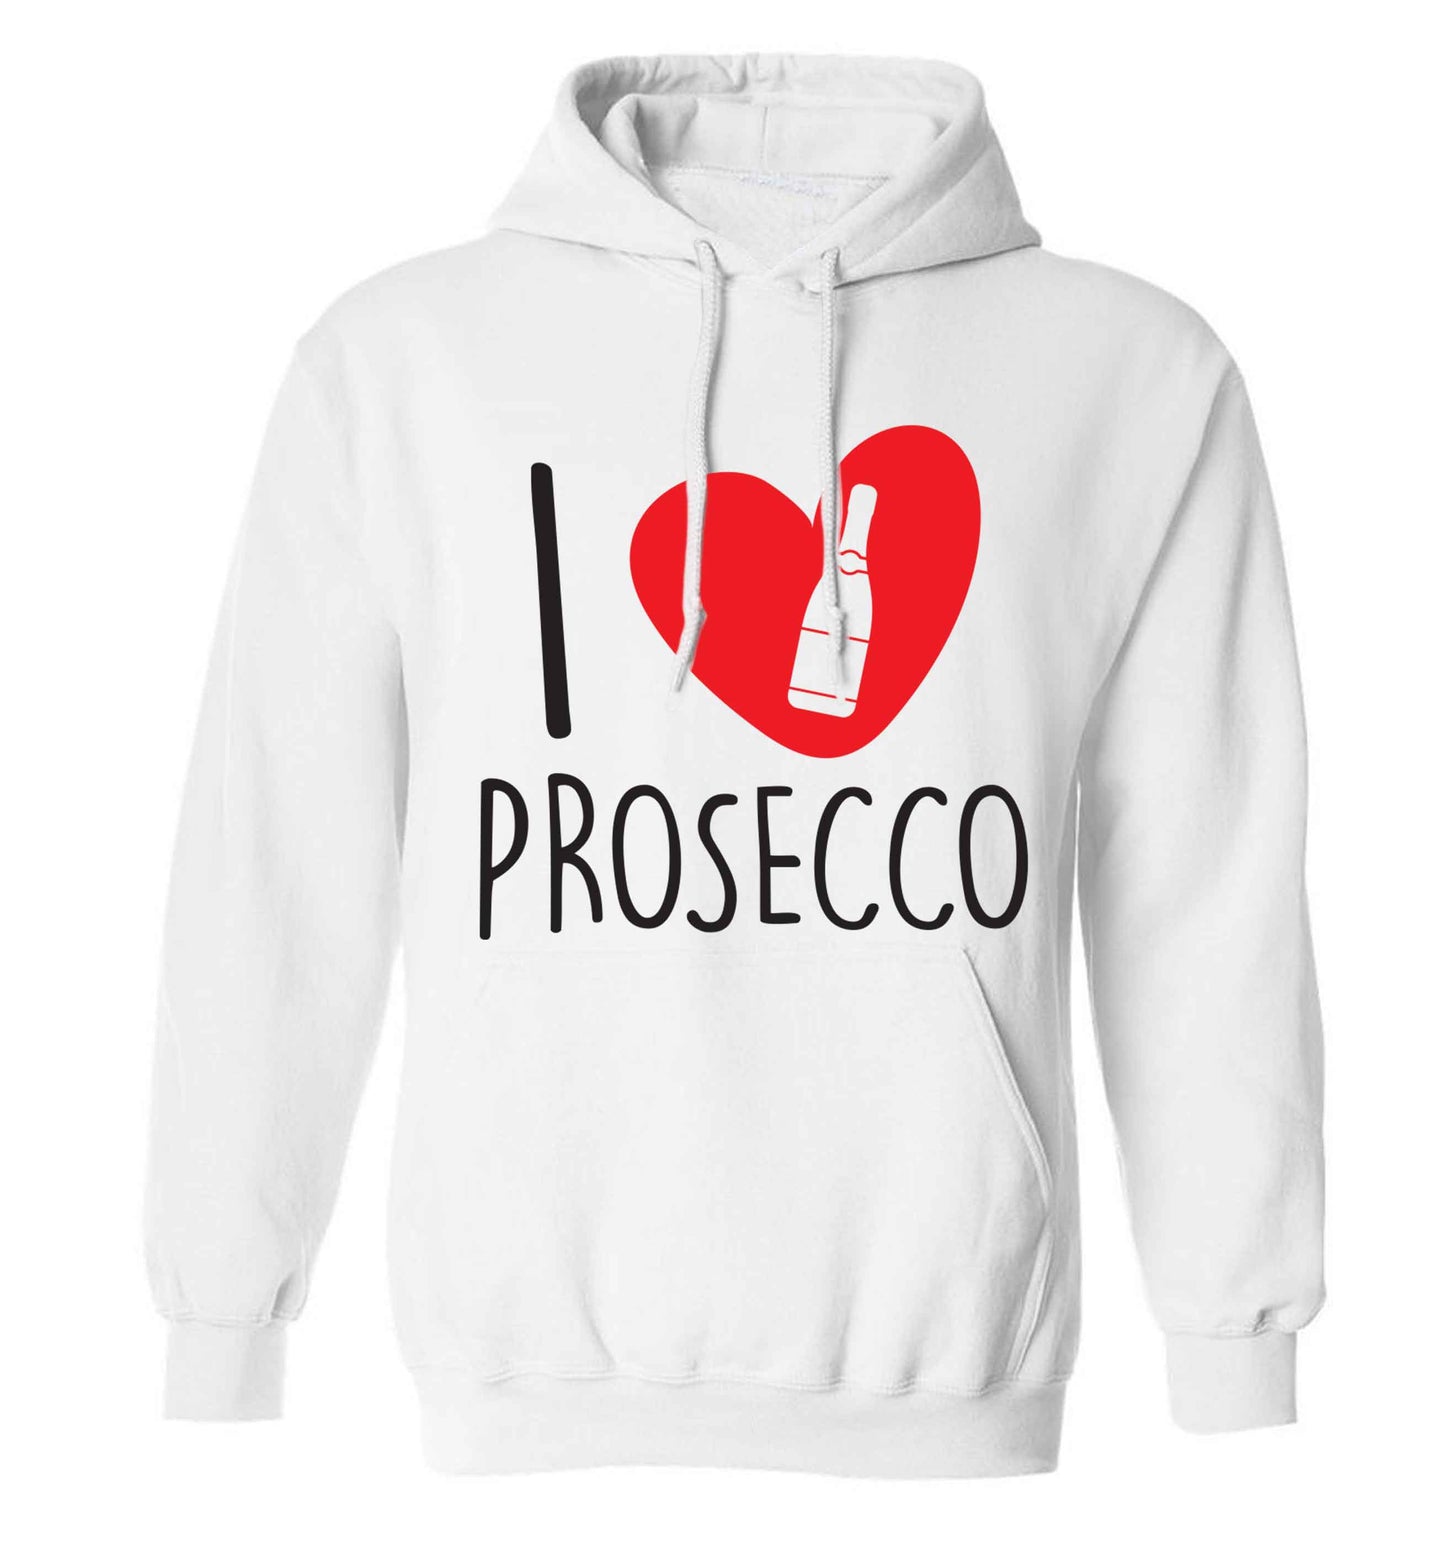 I love prosecco adults unisex white hoodie 2XL